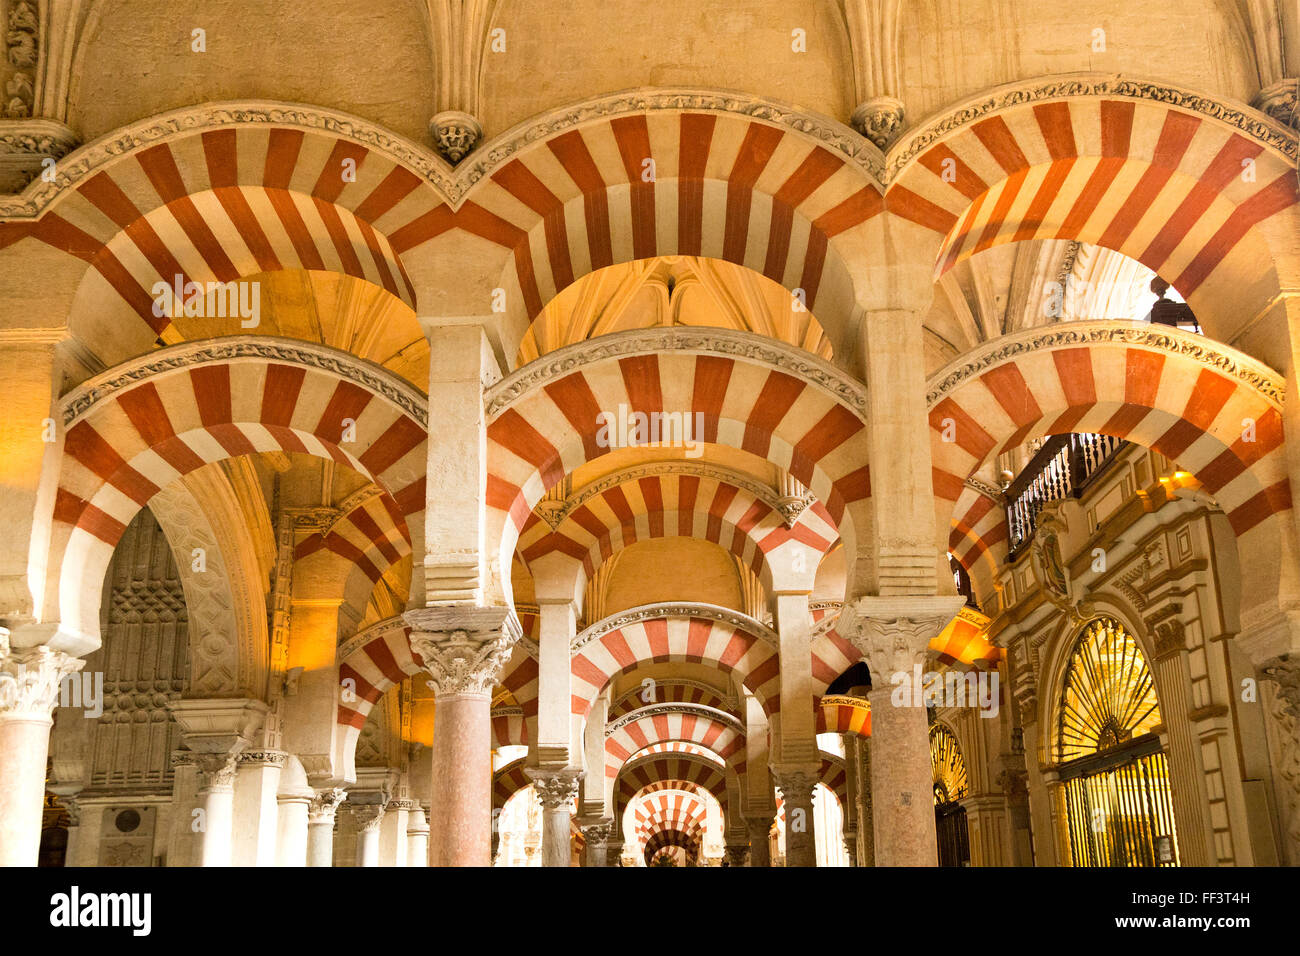 Moorish arches in the former mosque now cathedral, Cordoba, Spain Stock Photo